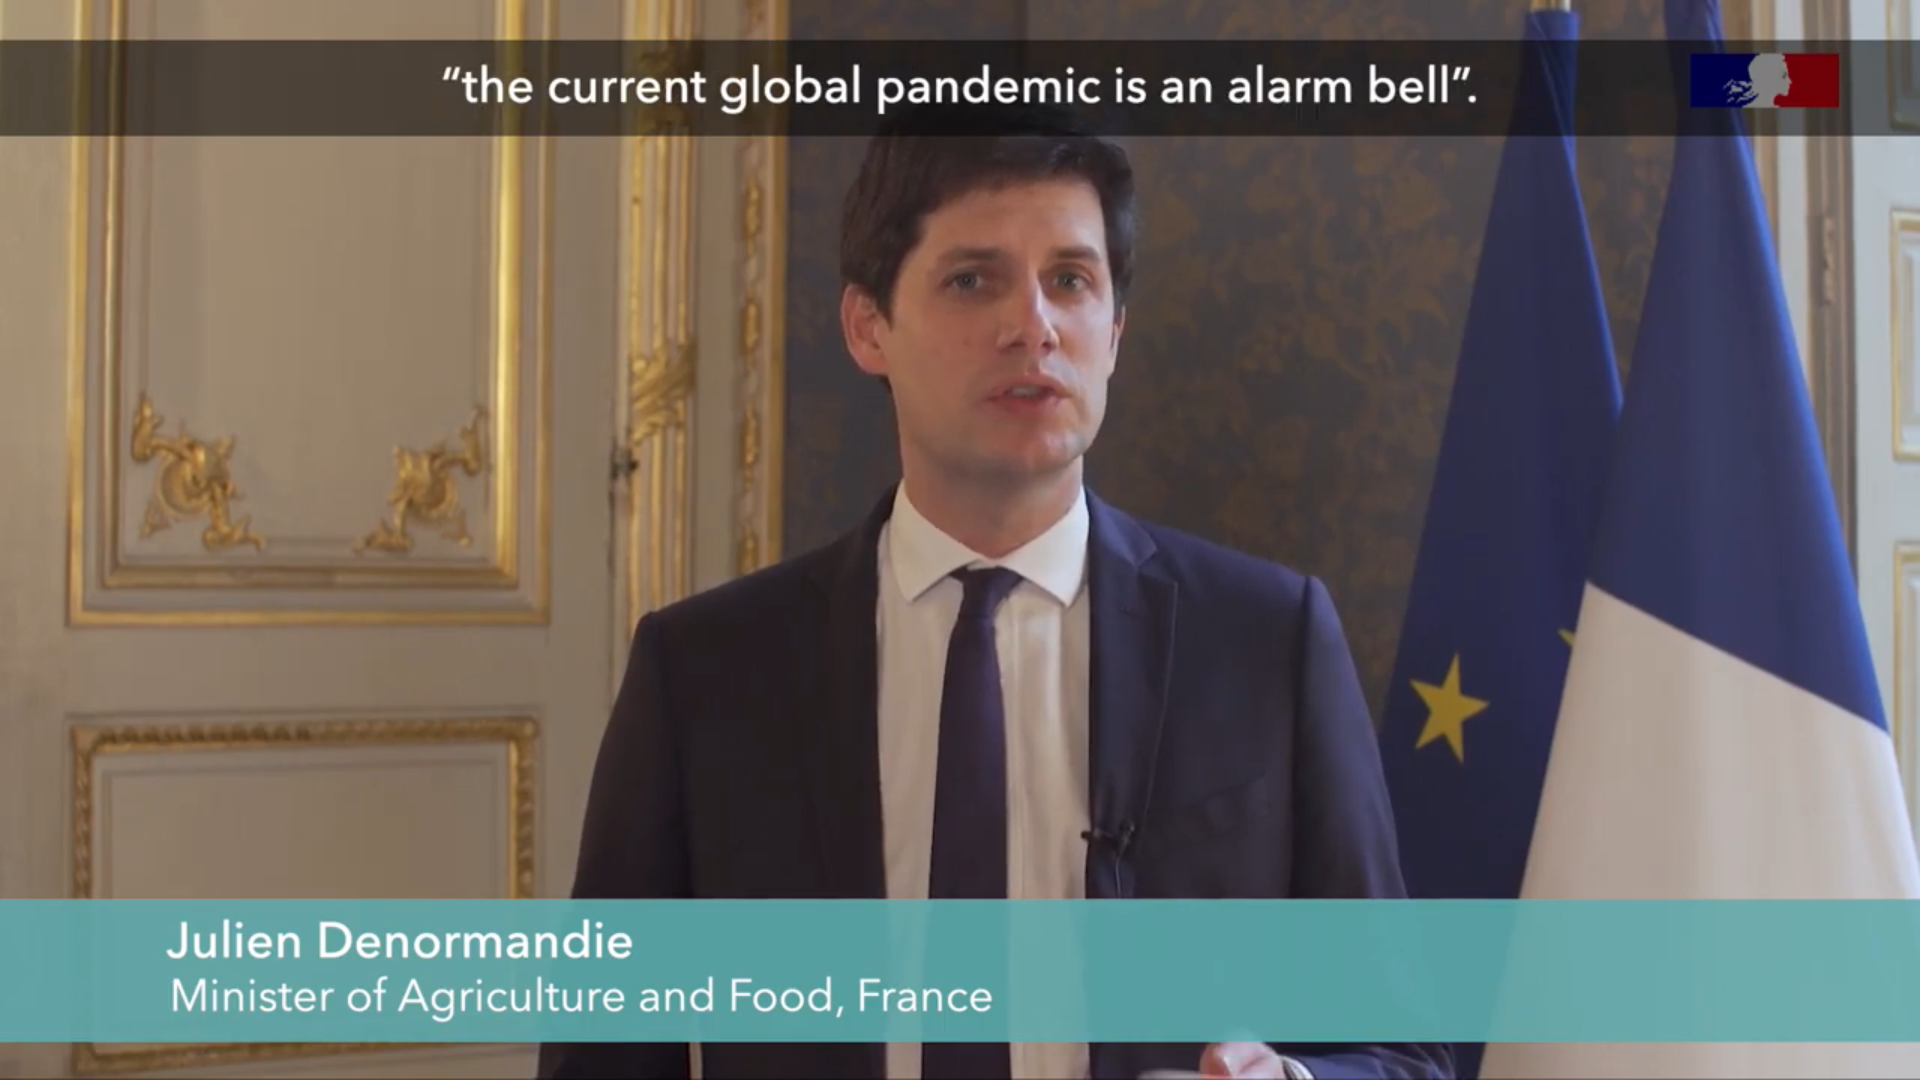 VIDEO - Building the PREZODE international initiative for Preventing Zoonotic Disease Emergence